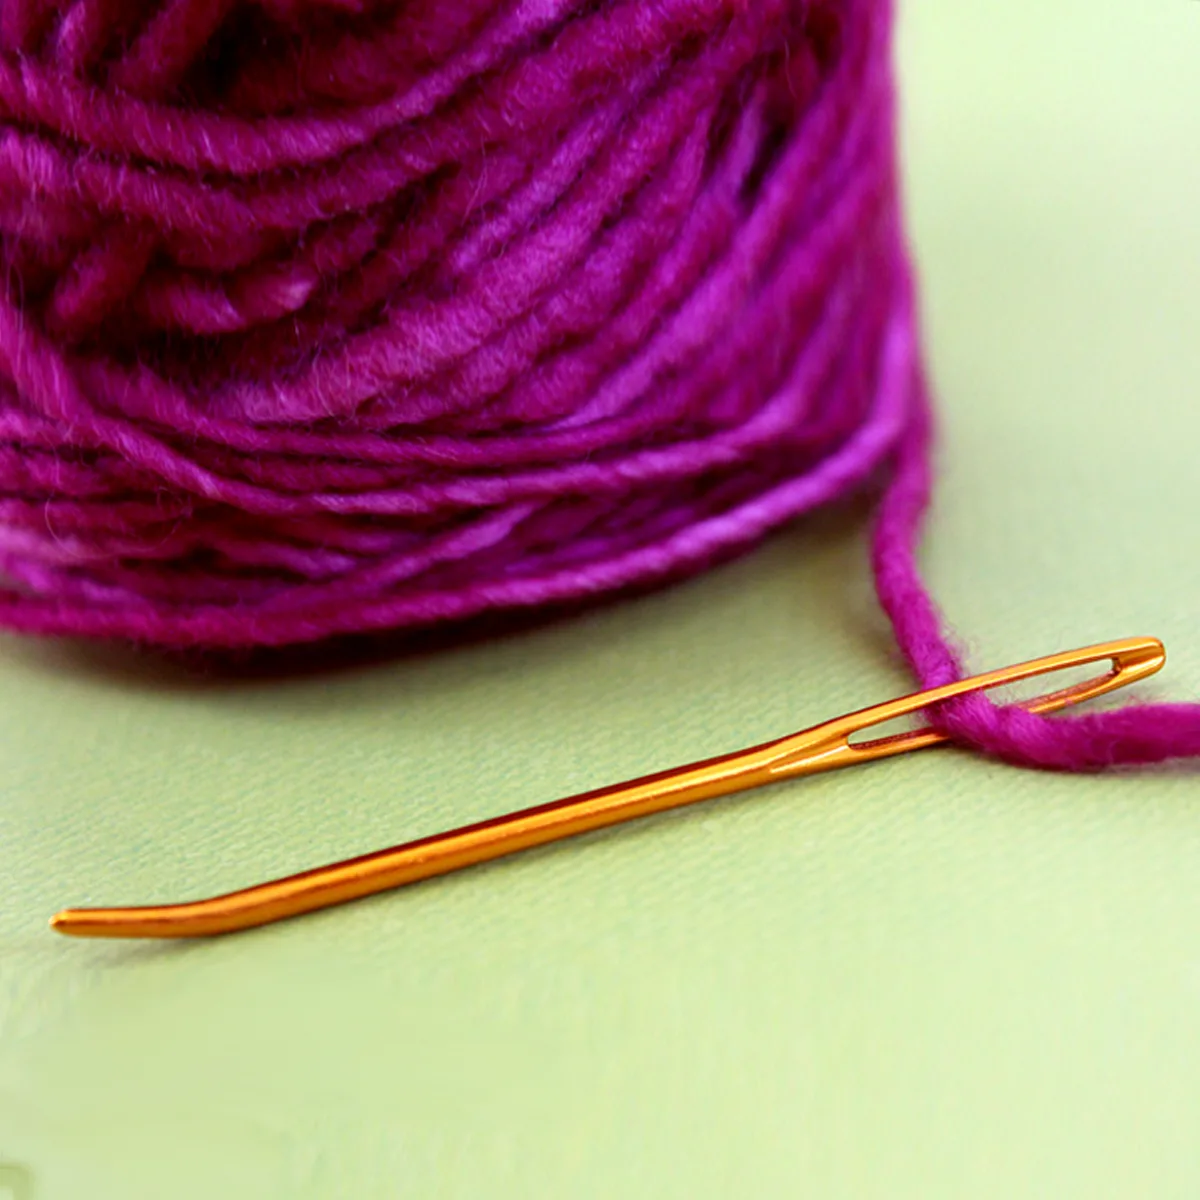 Tapestry Needle threaded with bright purple yarn atop a green background.